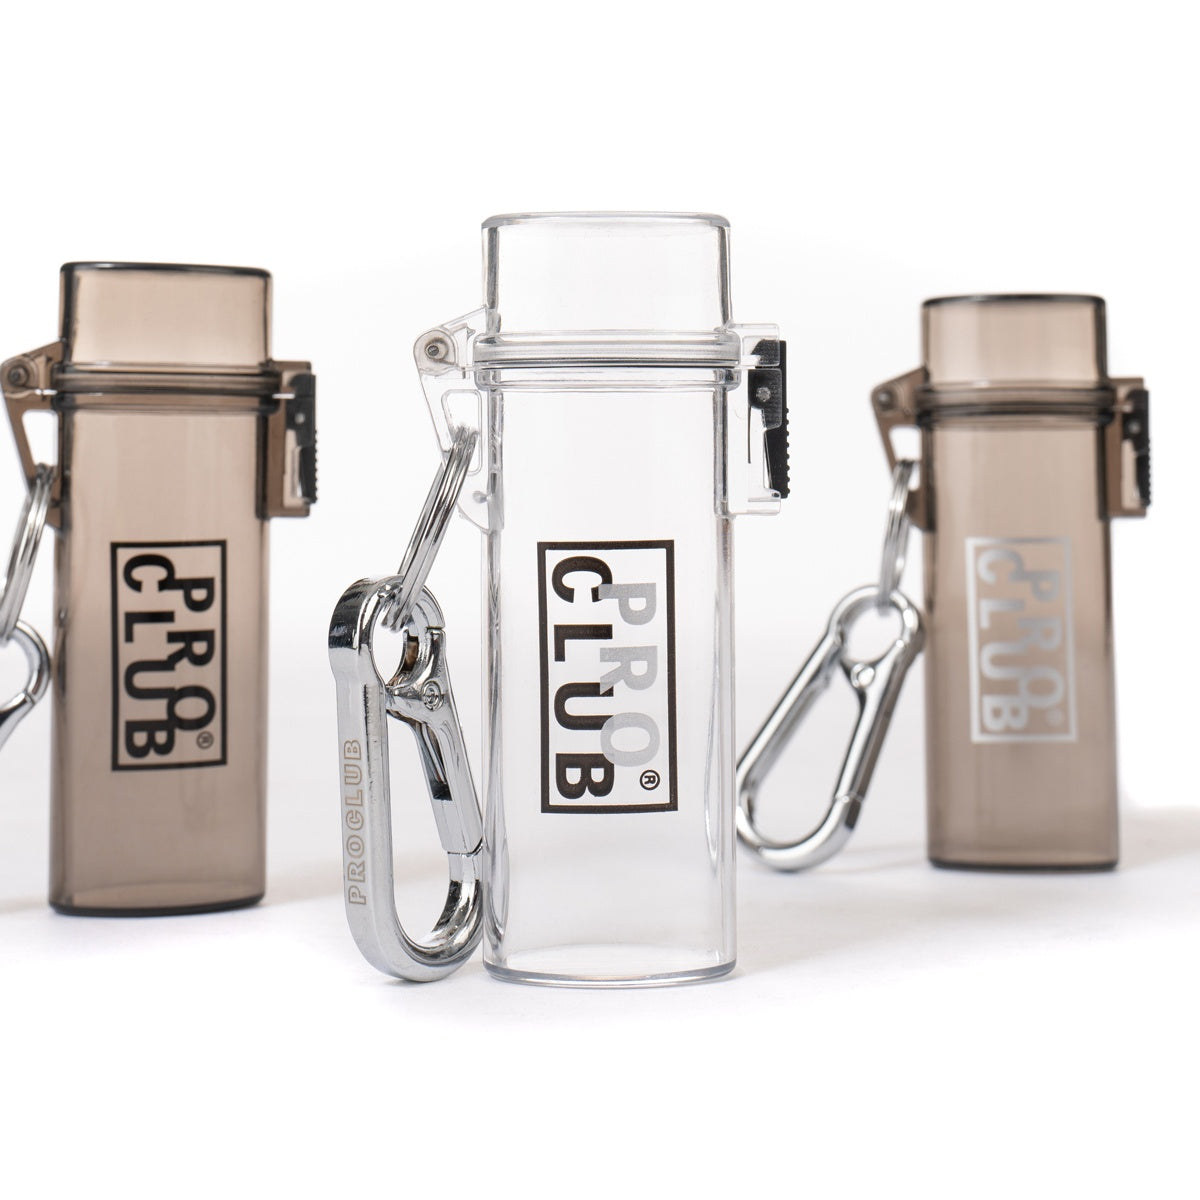 Pro Club Waterproof Lighter Case Keychain - Tinted case, Silver Logo